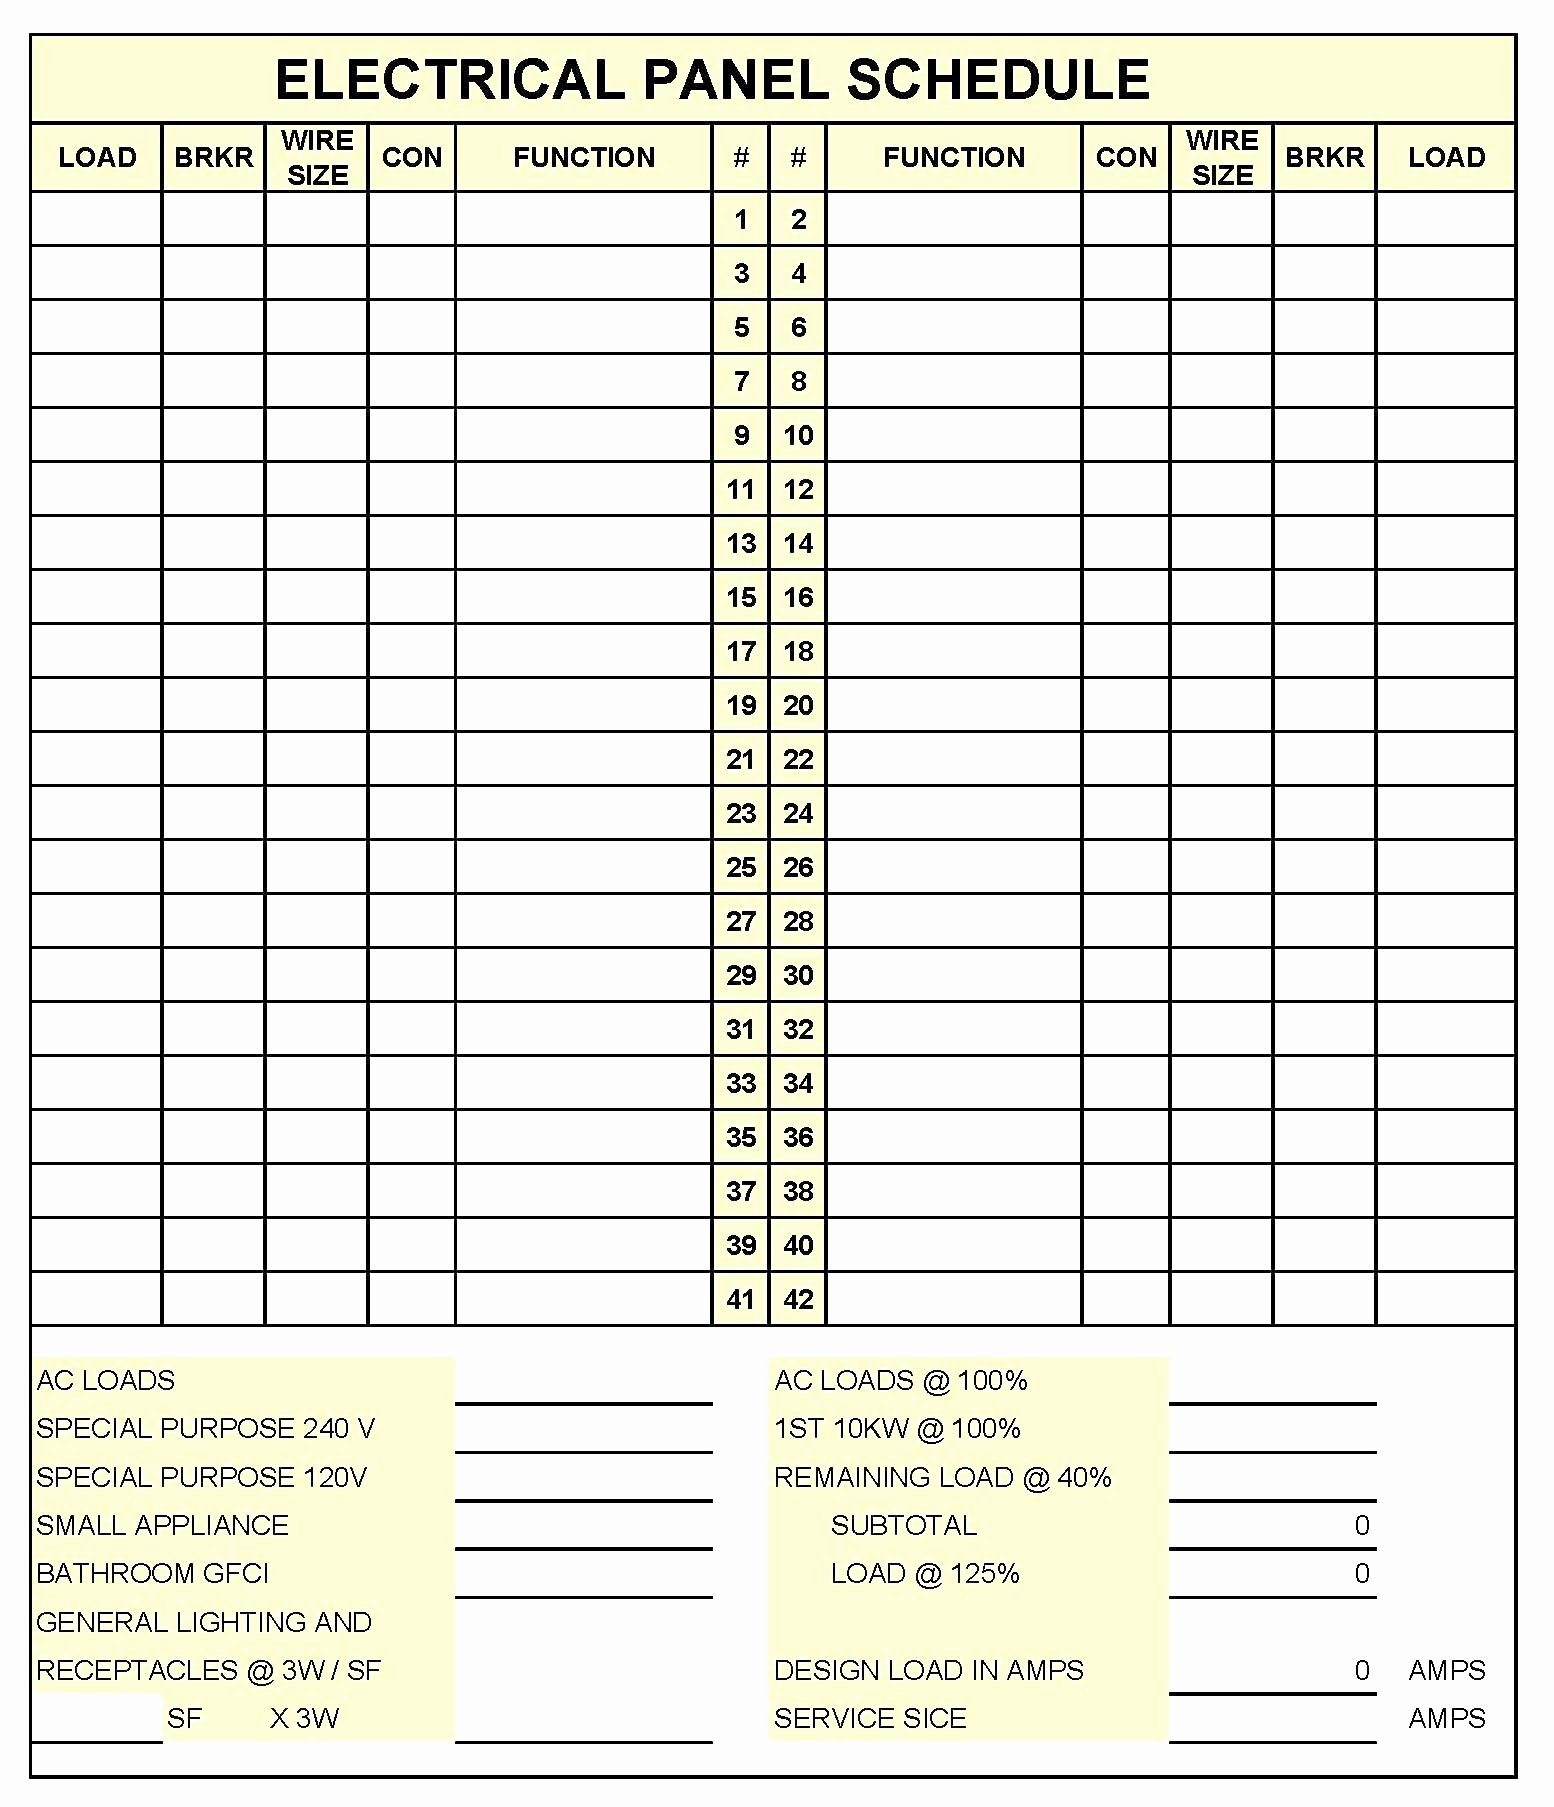 Electric Panel Schedule Template New Electrical Panel Schedule Template Excel Glendale